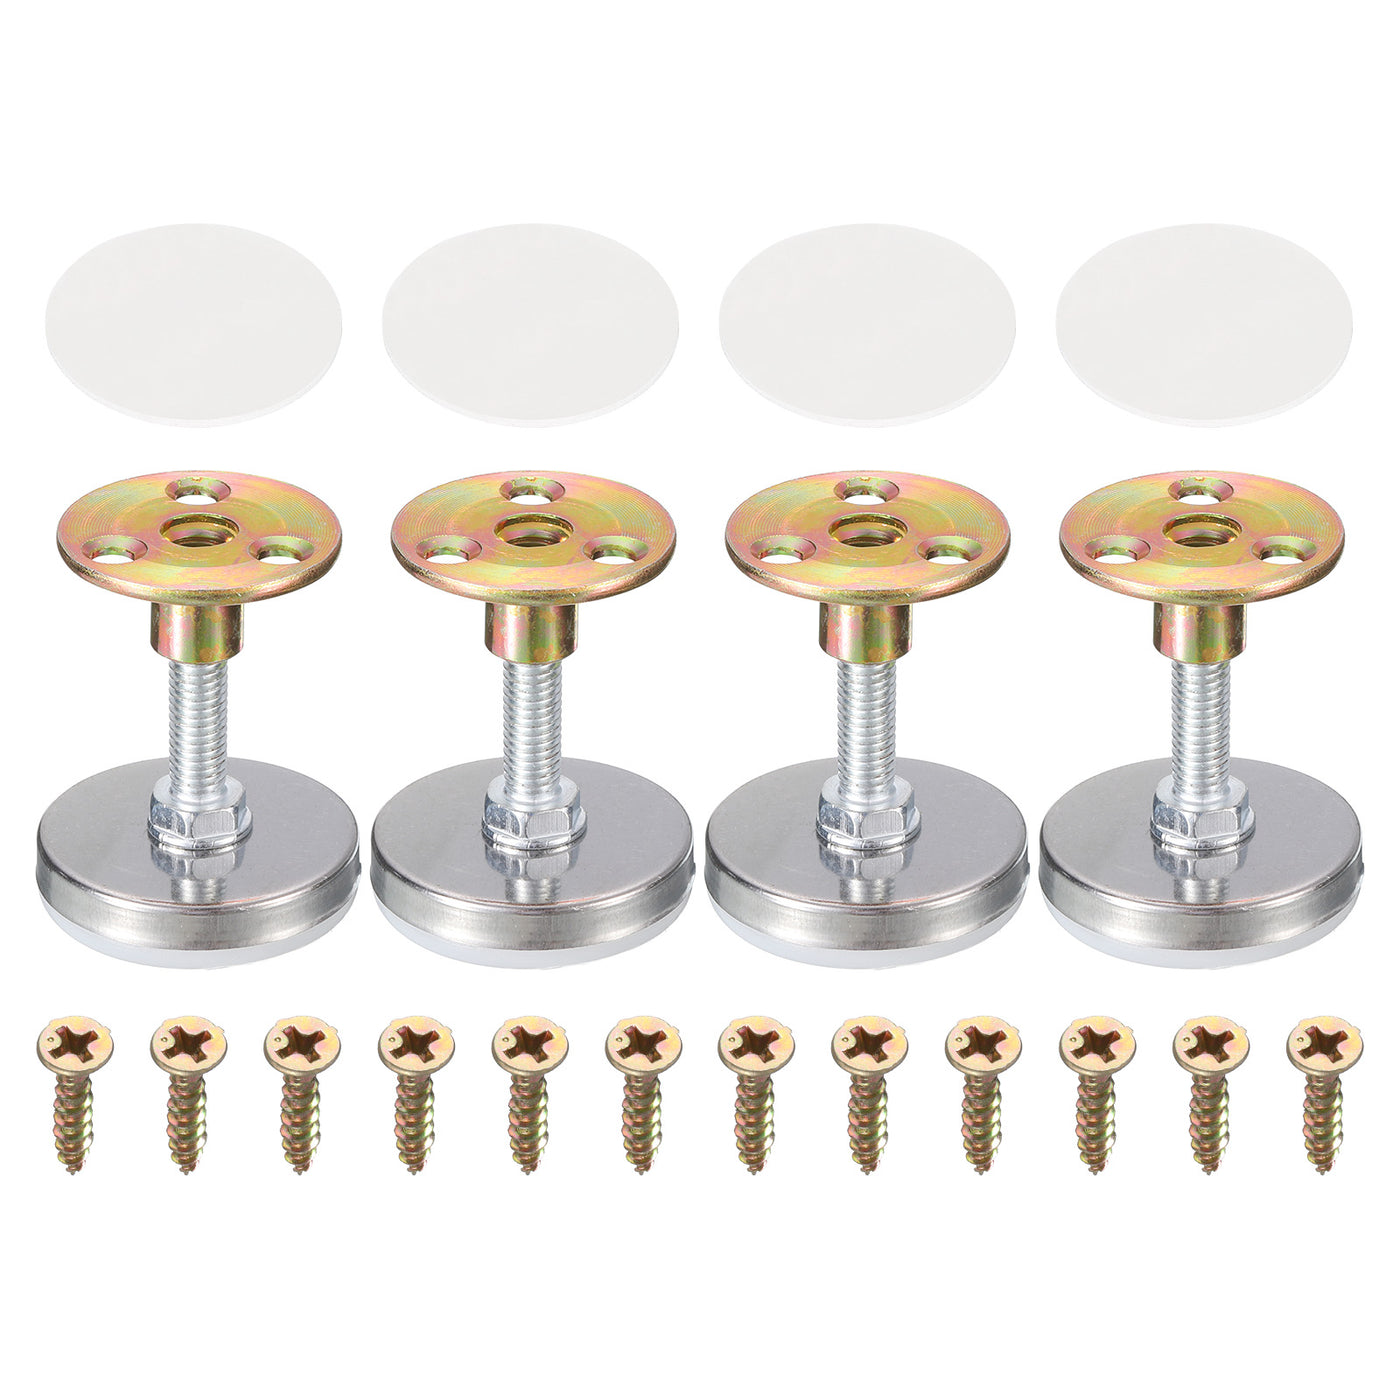 uxcell Uxcell Thread Furniture Leveling Feet, 4Pcs - Adjustable Furniture Feet Levelers, Self-adhesive Threaded Screw-in Raised Base for Tables Sofas (43 x 12 MM)